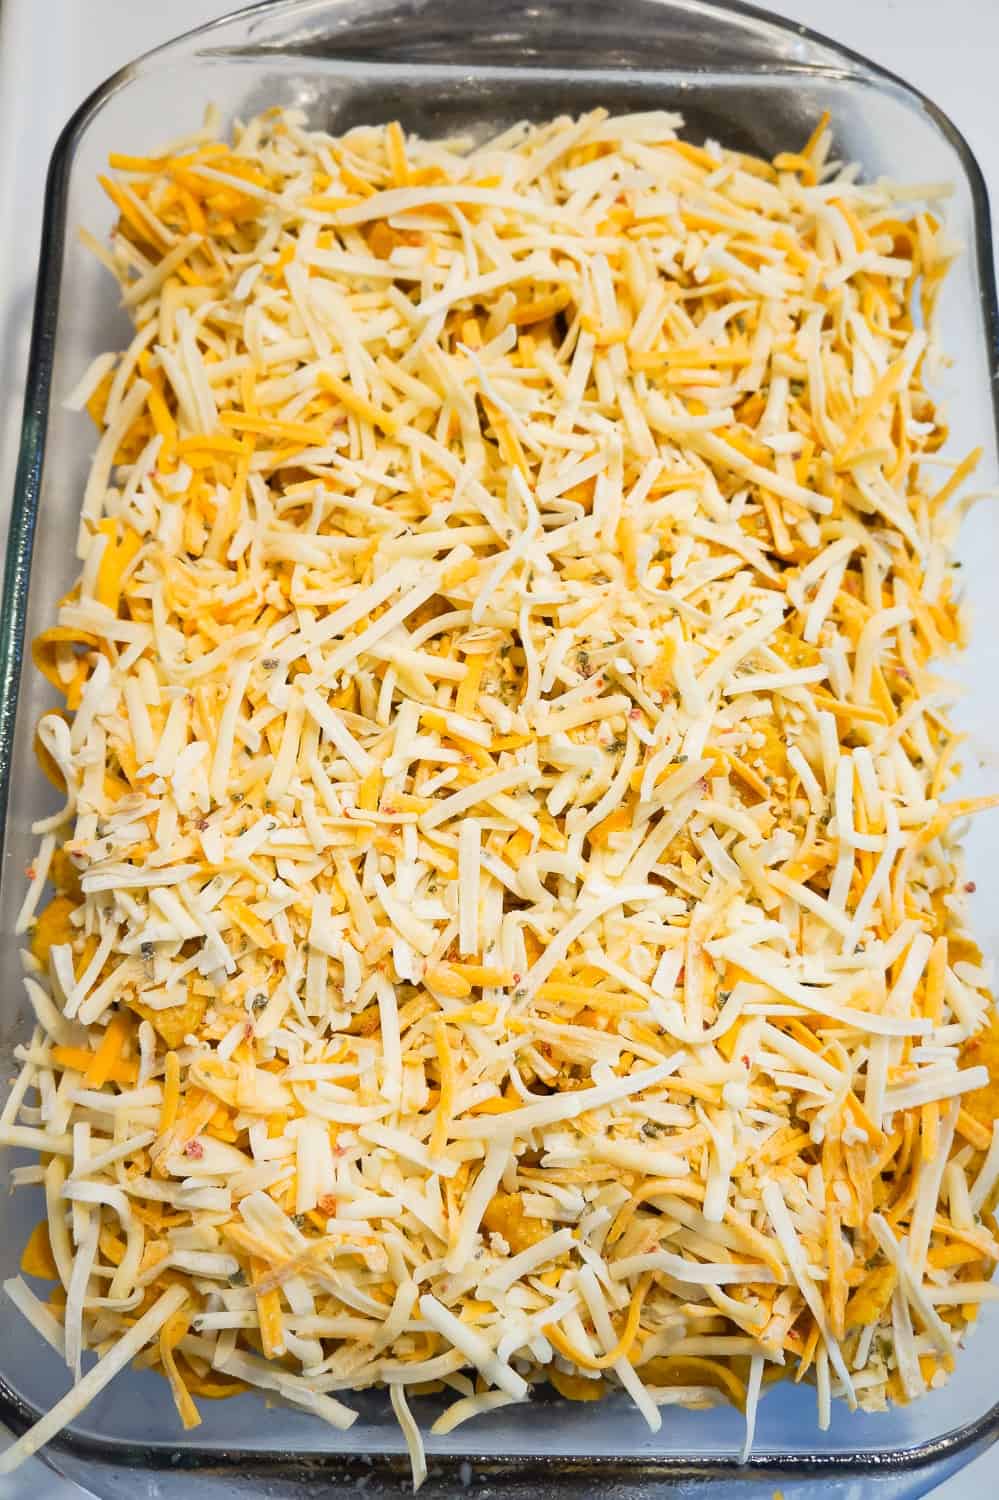 shredded cheese blend on top of frito pie